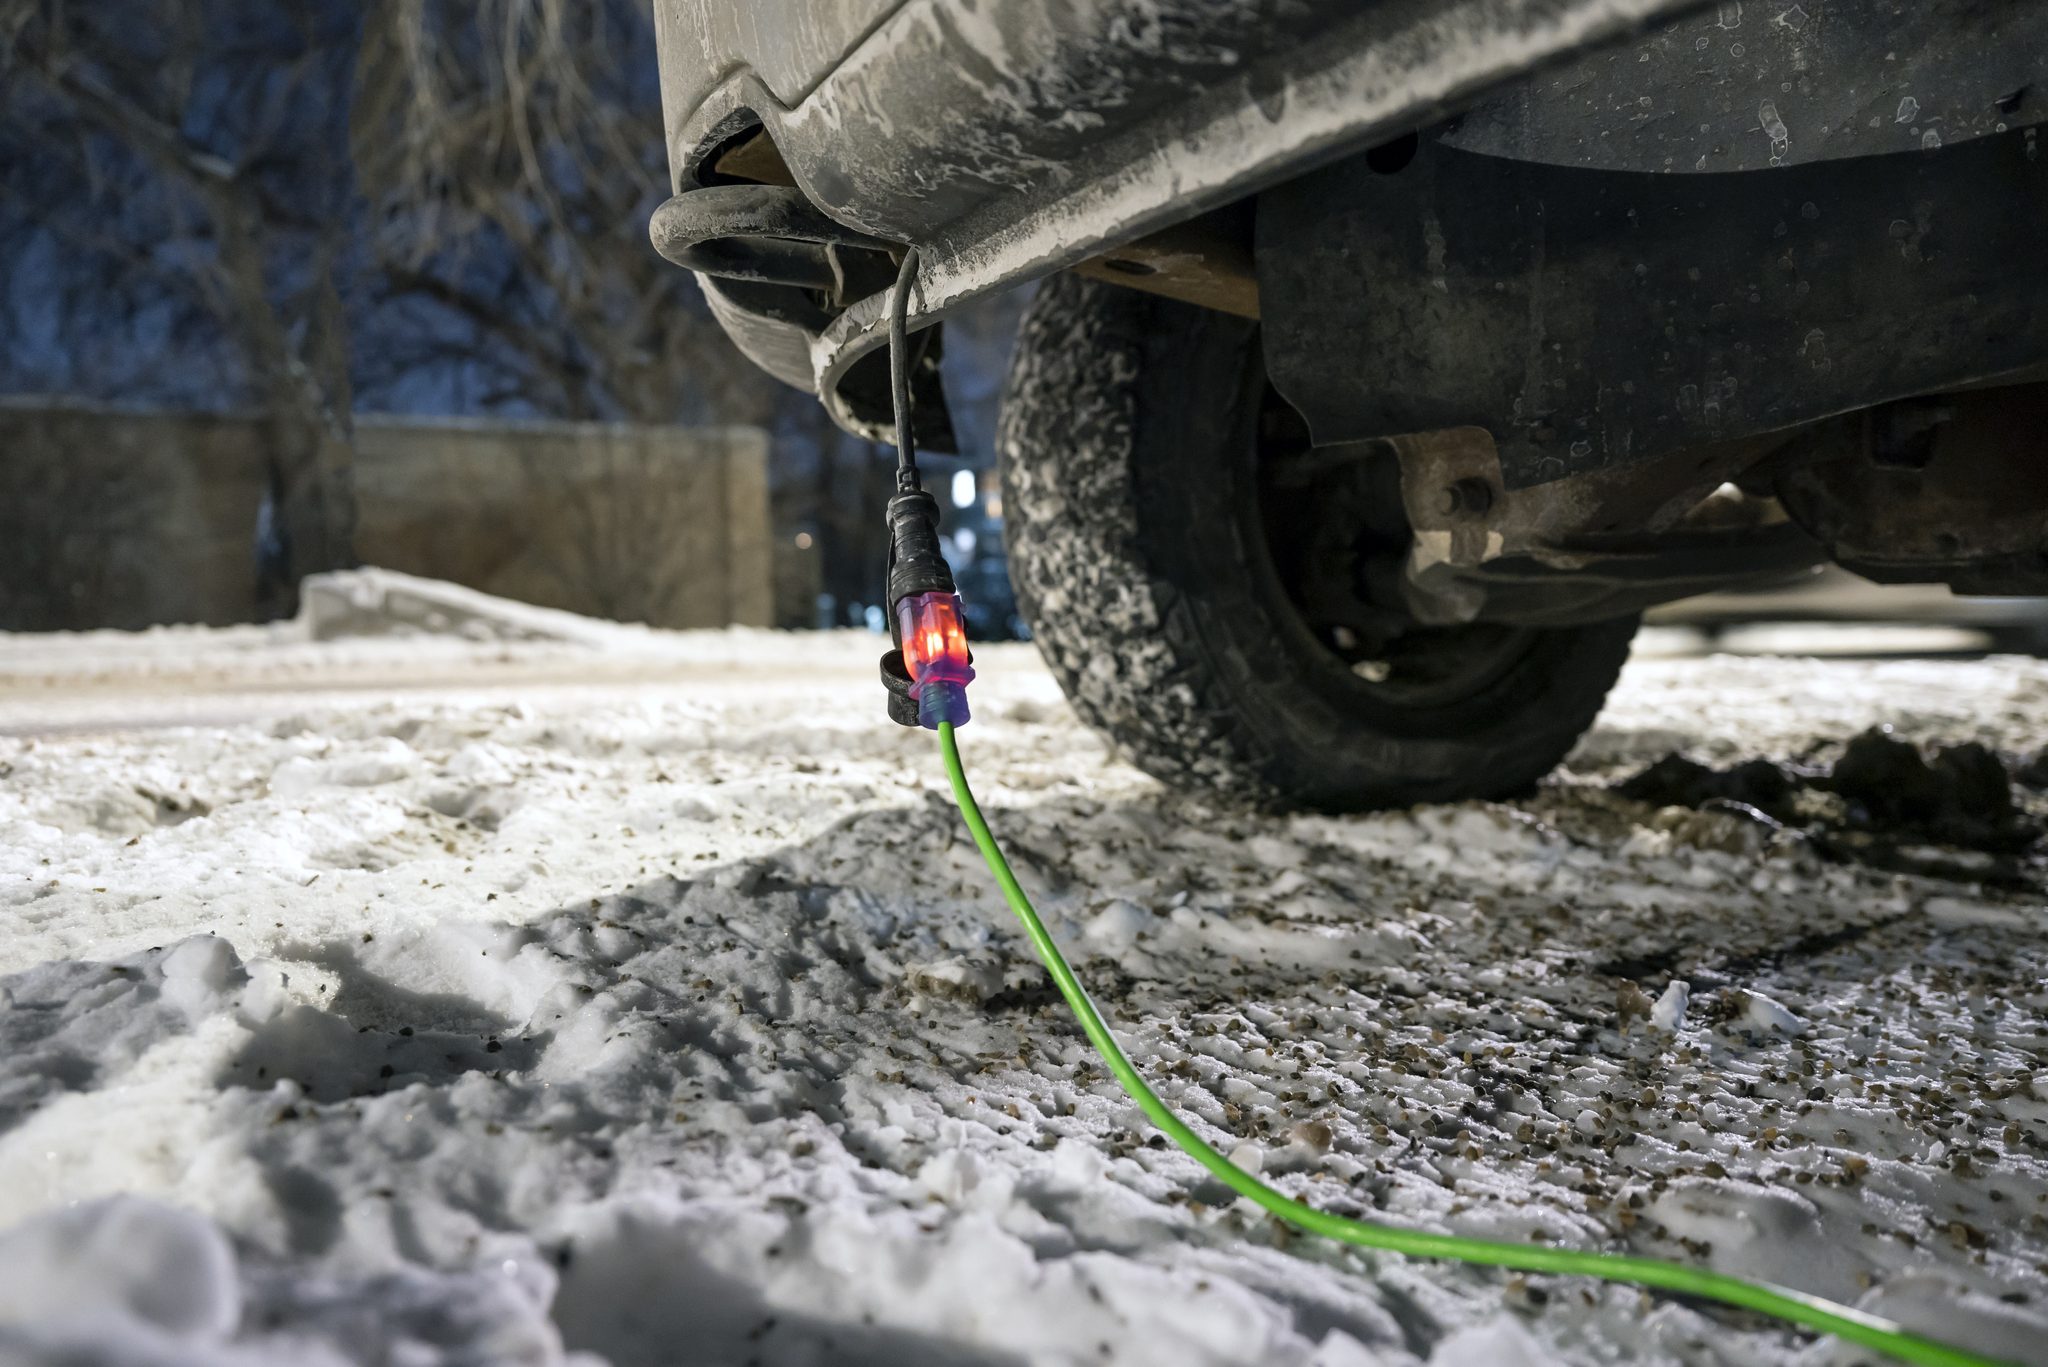 Extension cord plugged into vehicle in winter